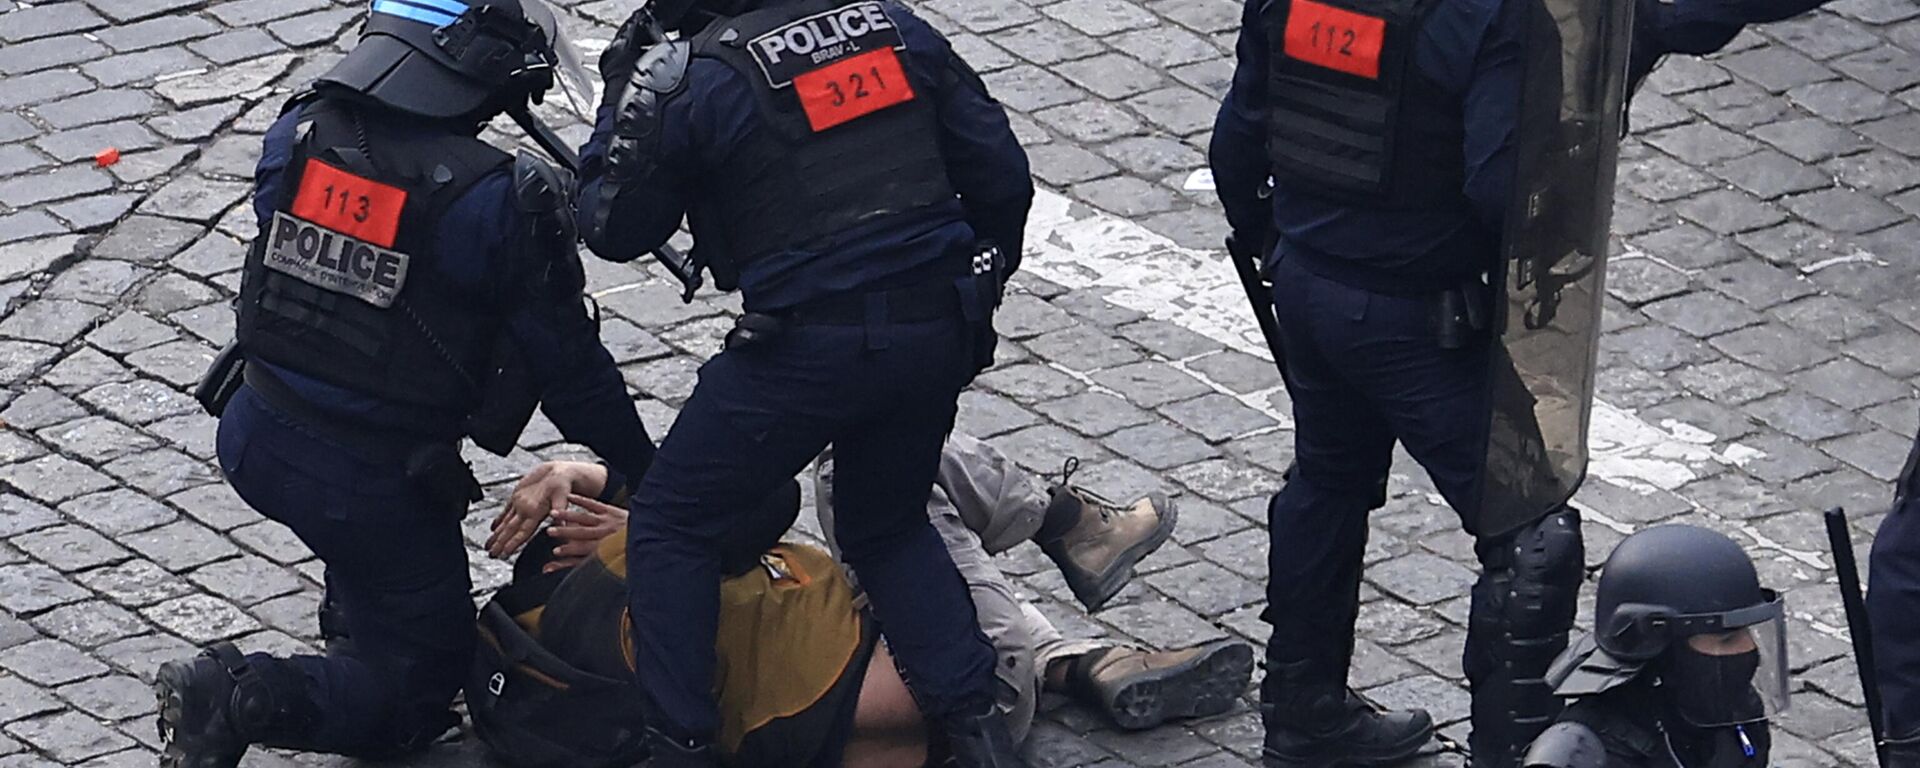 A protester is detained by riot police officers during a demonstration, Tuesday, March 7, 2023 in Paris. - Sputnik International, 1920, 08.03.2023